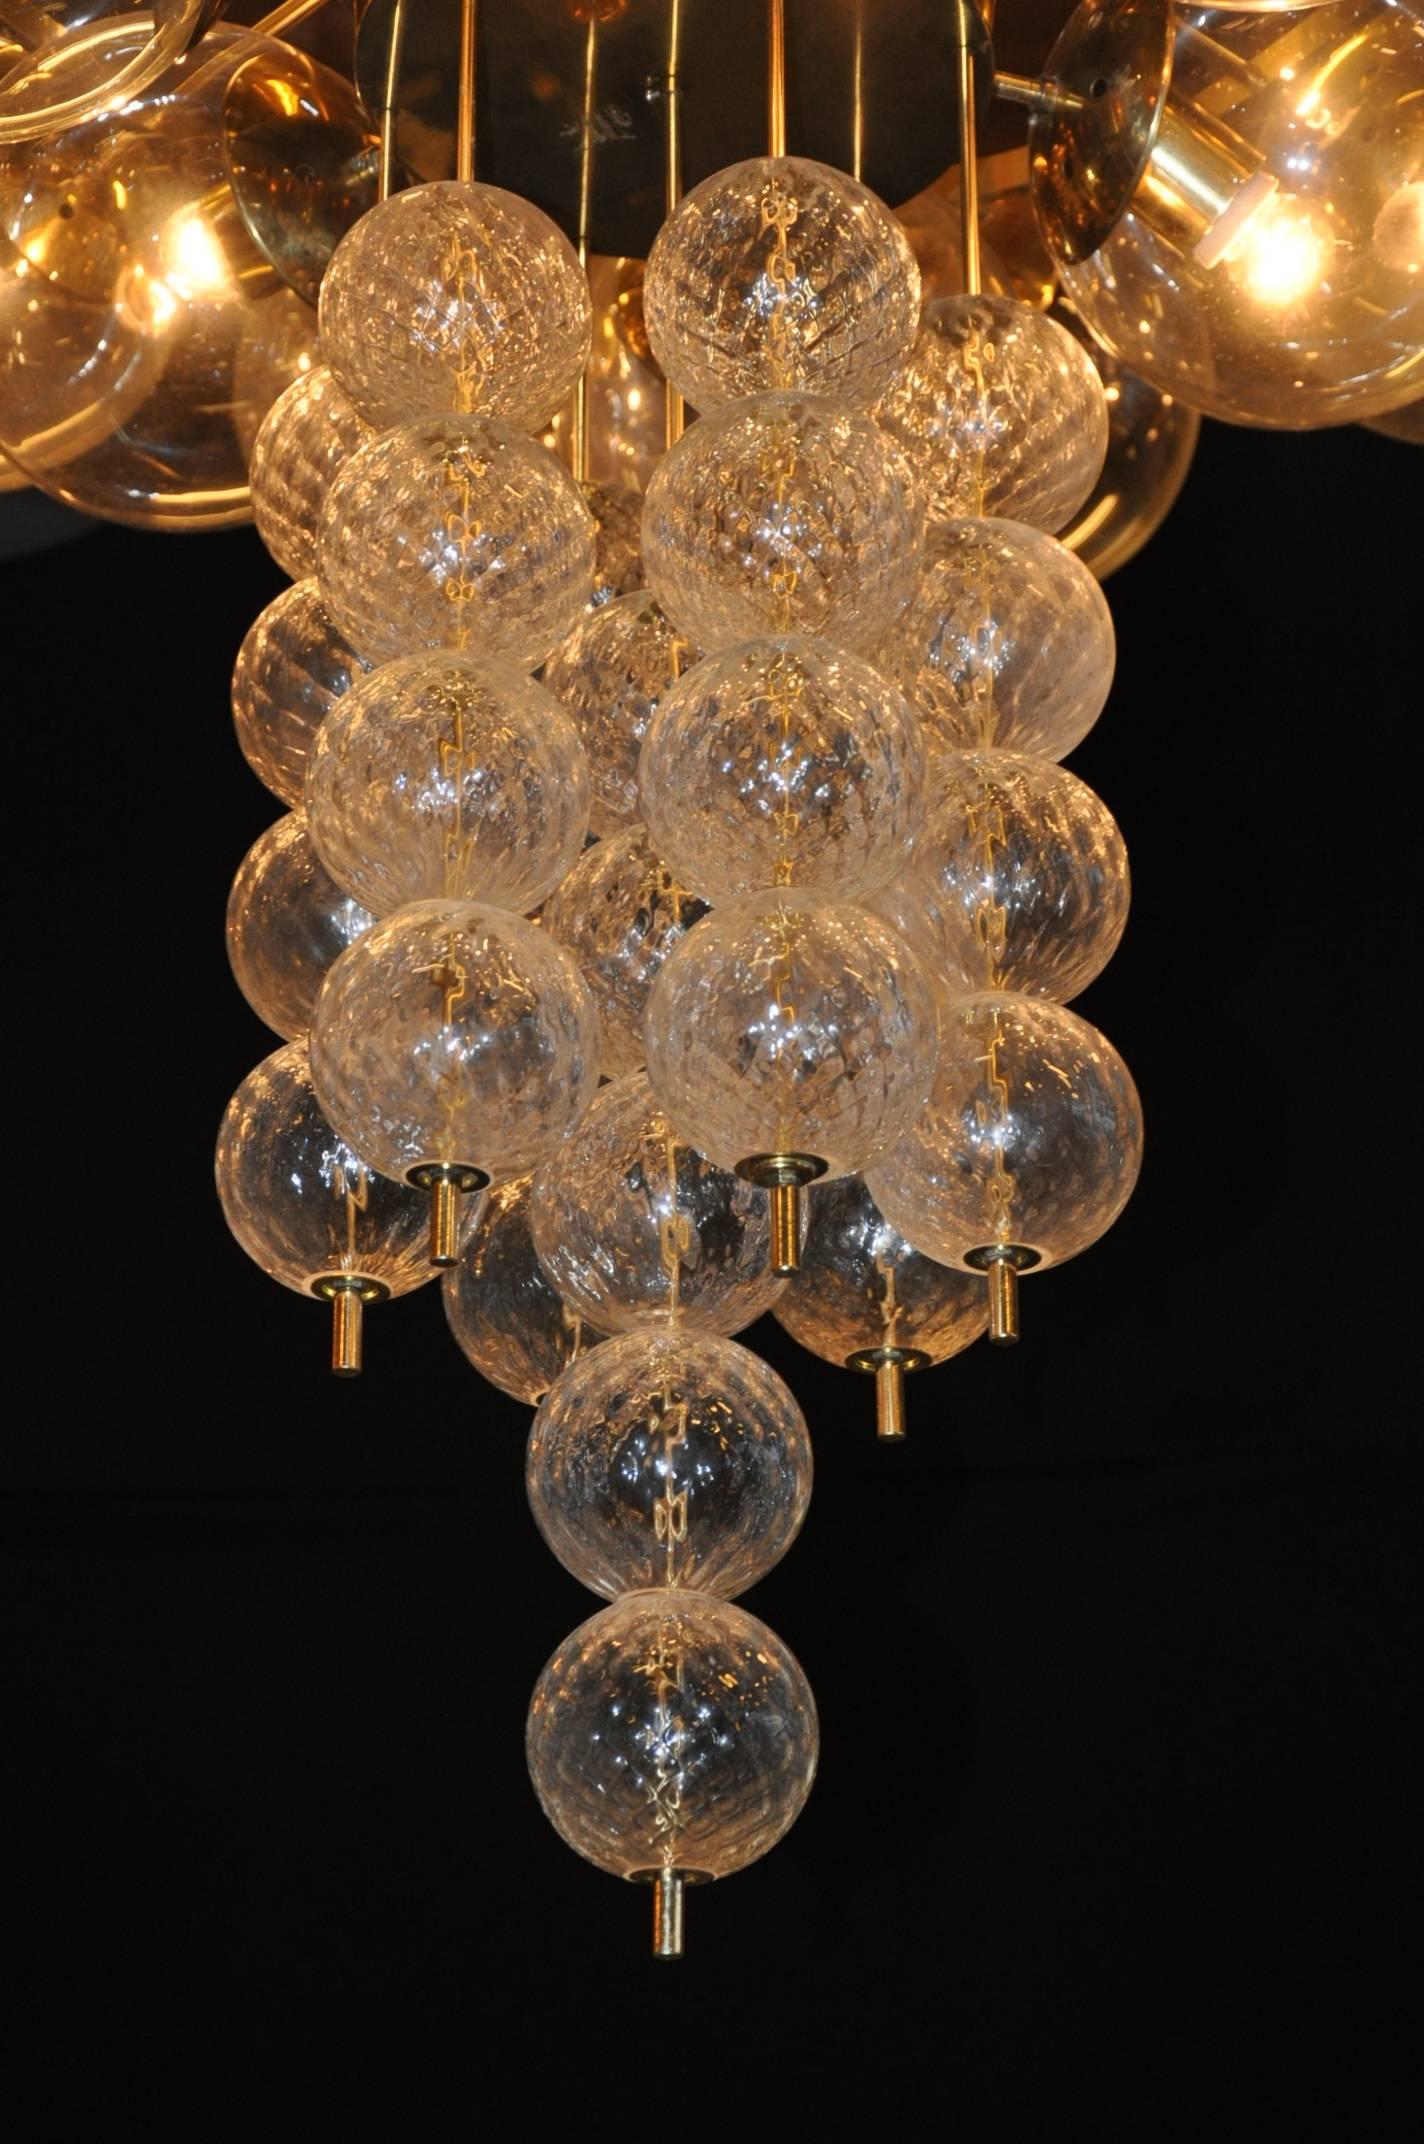 An extremely large chandelier manufactured in the Czech Republic, circa 1960.

This impressive piece is made of high quality handblown glass balls. The balls holding light bulbs are made of beautiful clear glass, the lower decorative balls have a